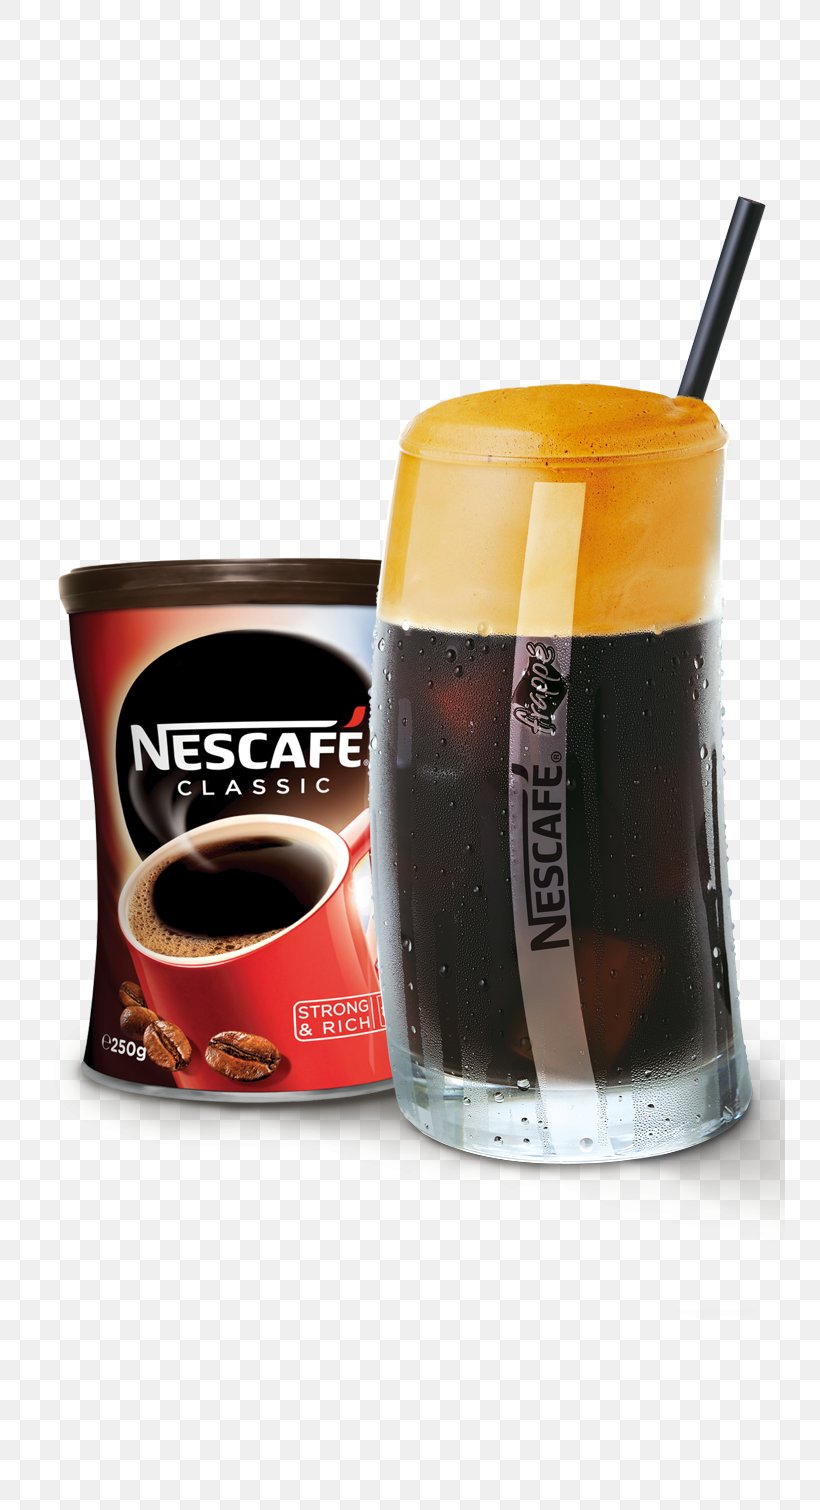 Frappé Coffee Instant Coffee Nescafé Coffee Cup, PNG, 750x1510px, Instant Coffee, Bulgaria, Coffee, Coffee Cup, Cup Download Free